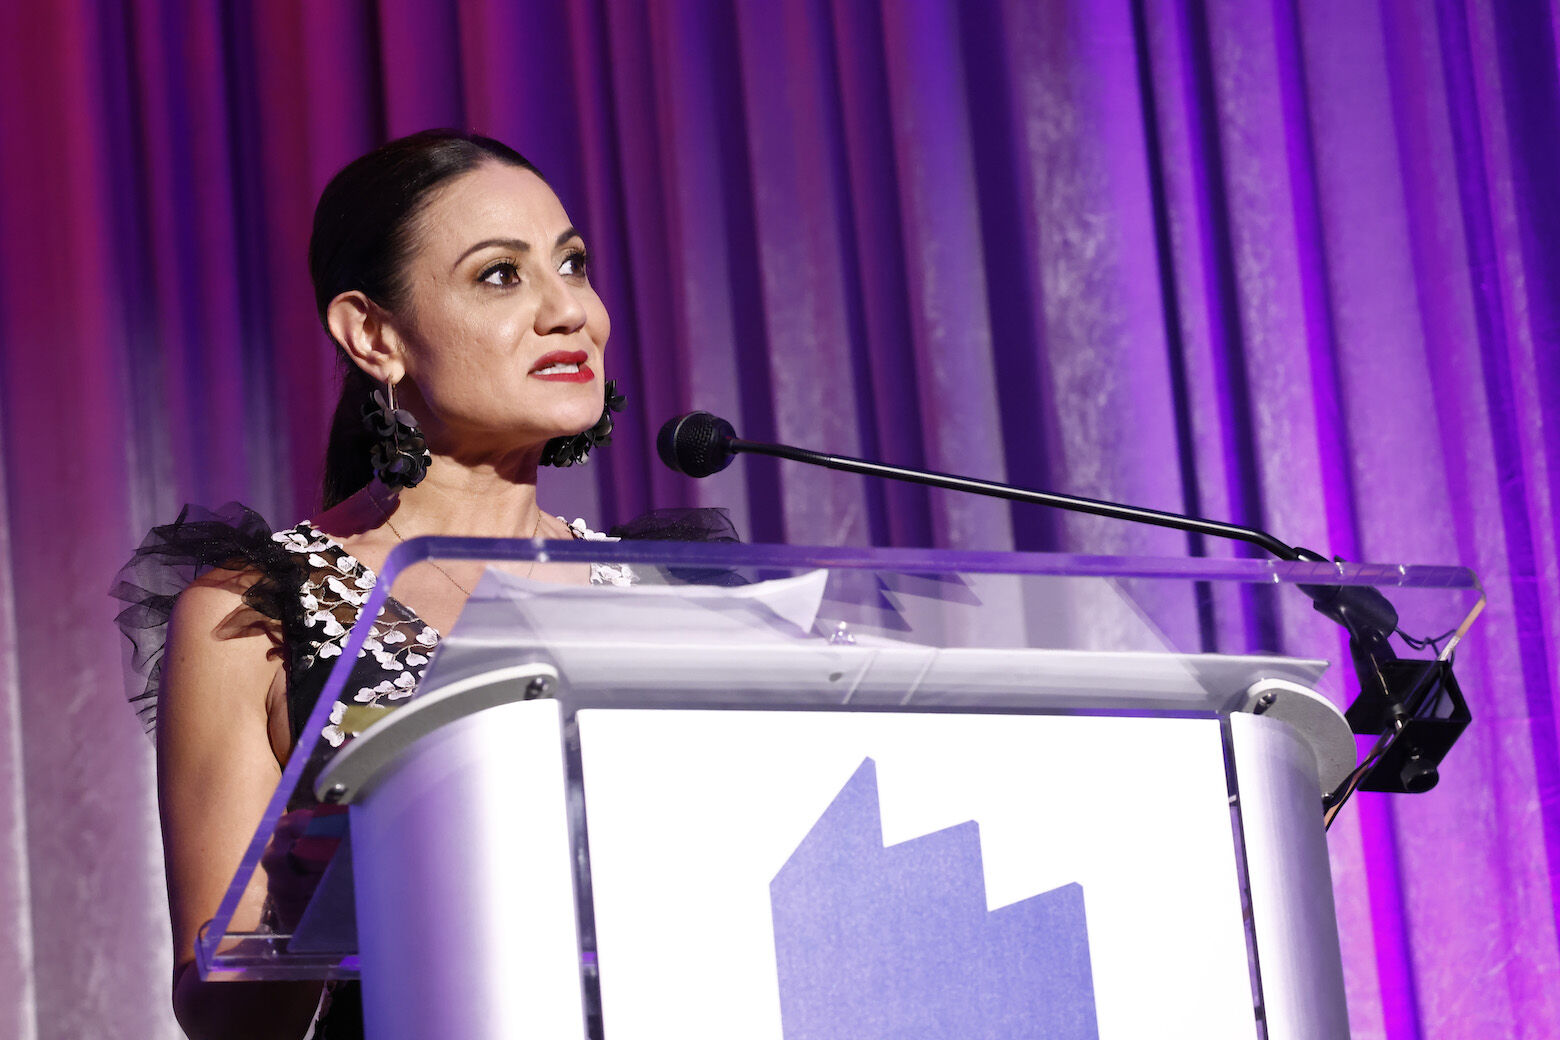 WASHINGTON, DC - MARCH 31: Mónica Gil speaks onstage during the National Women's History Museum's signature Women Making History Awards Gala at The Schuyler at the Hamilton Hotel on March 31, 2023 in Washington, DC. (Photo by Paul Morigi/Getty Images for National Women's History Museum )